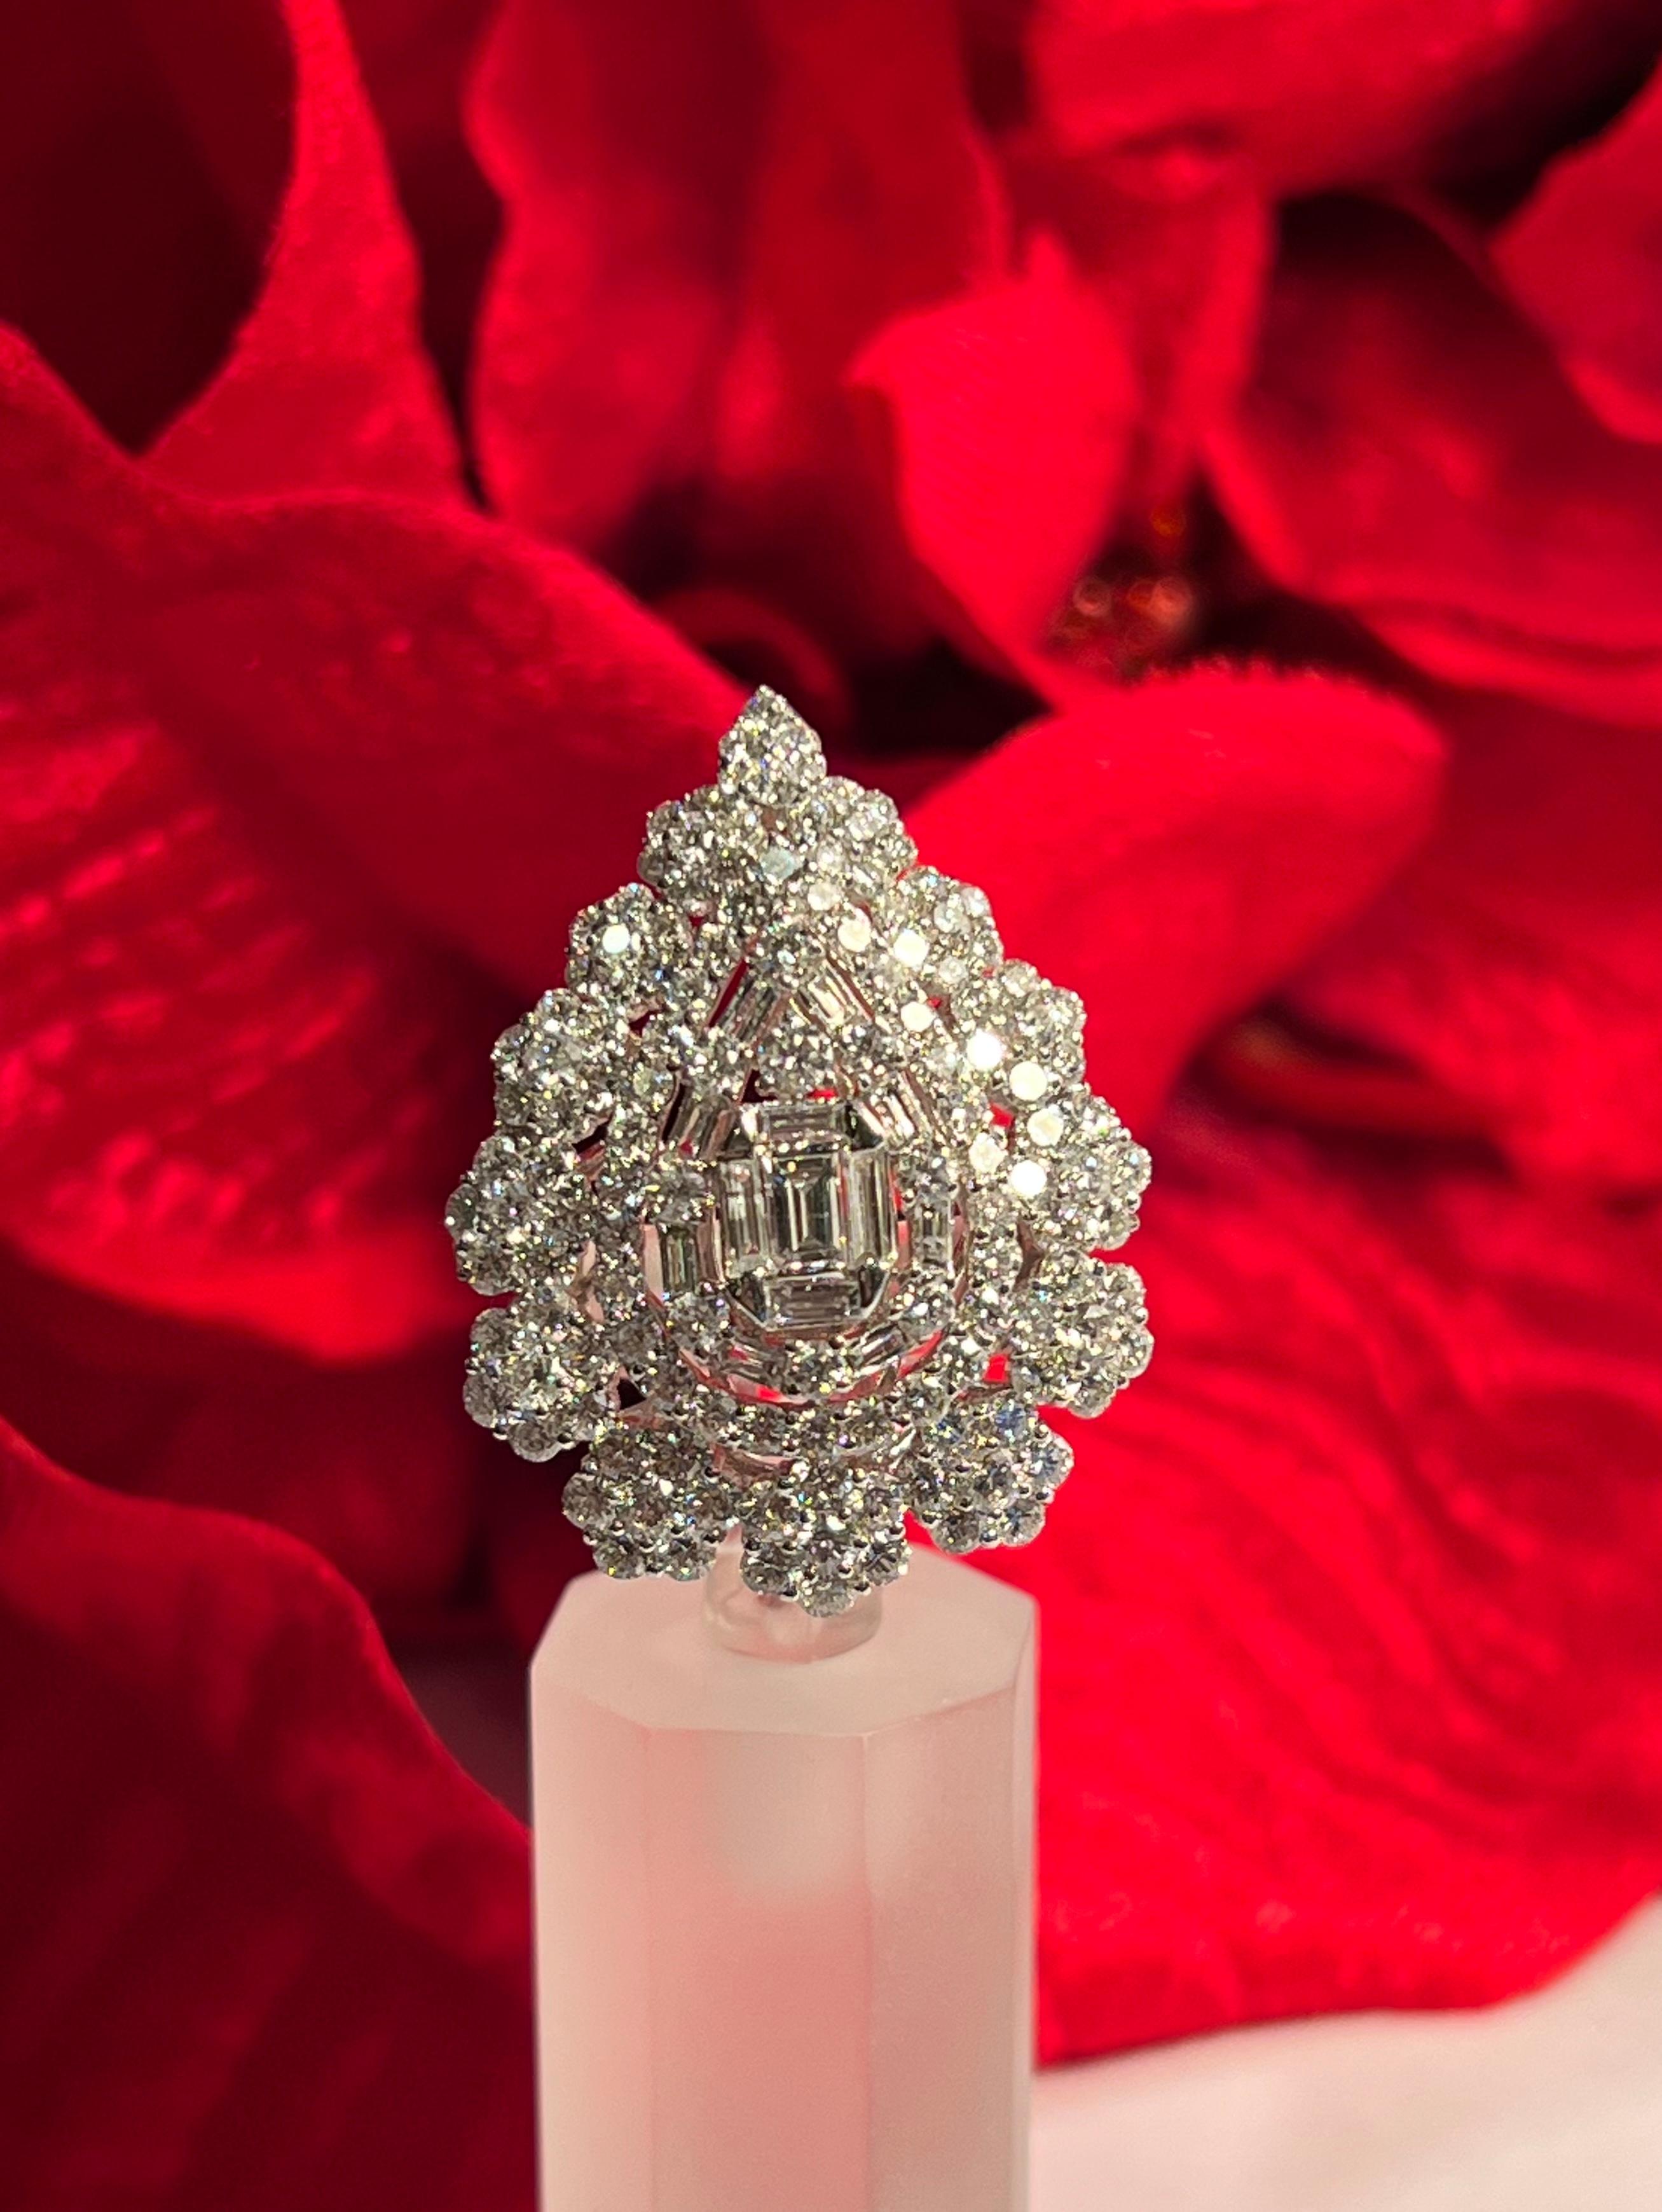 Very exquisite, 18 karat white gold pear shaped diamond cluster cocktail ring features a slightly domed center and an array of baguette diamonds in the middle creating an illusion of a large emerald cut diamond as the focal point in the middle.